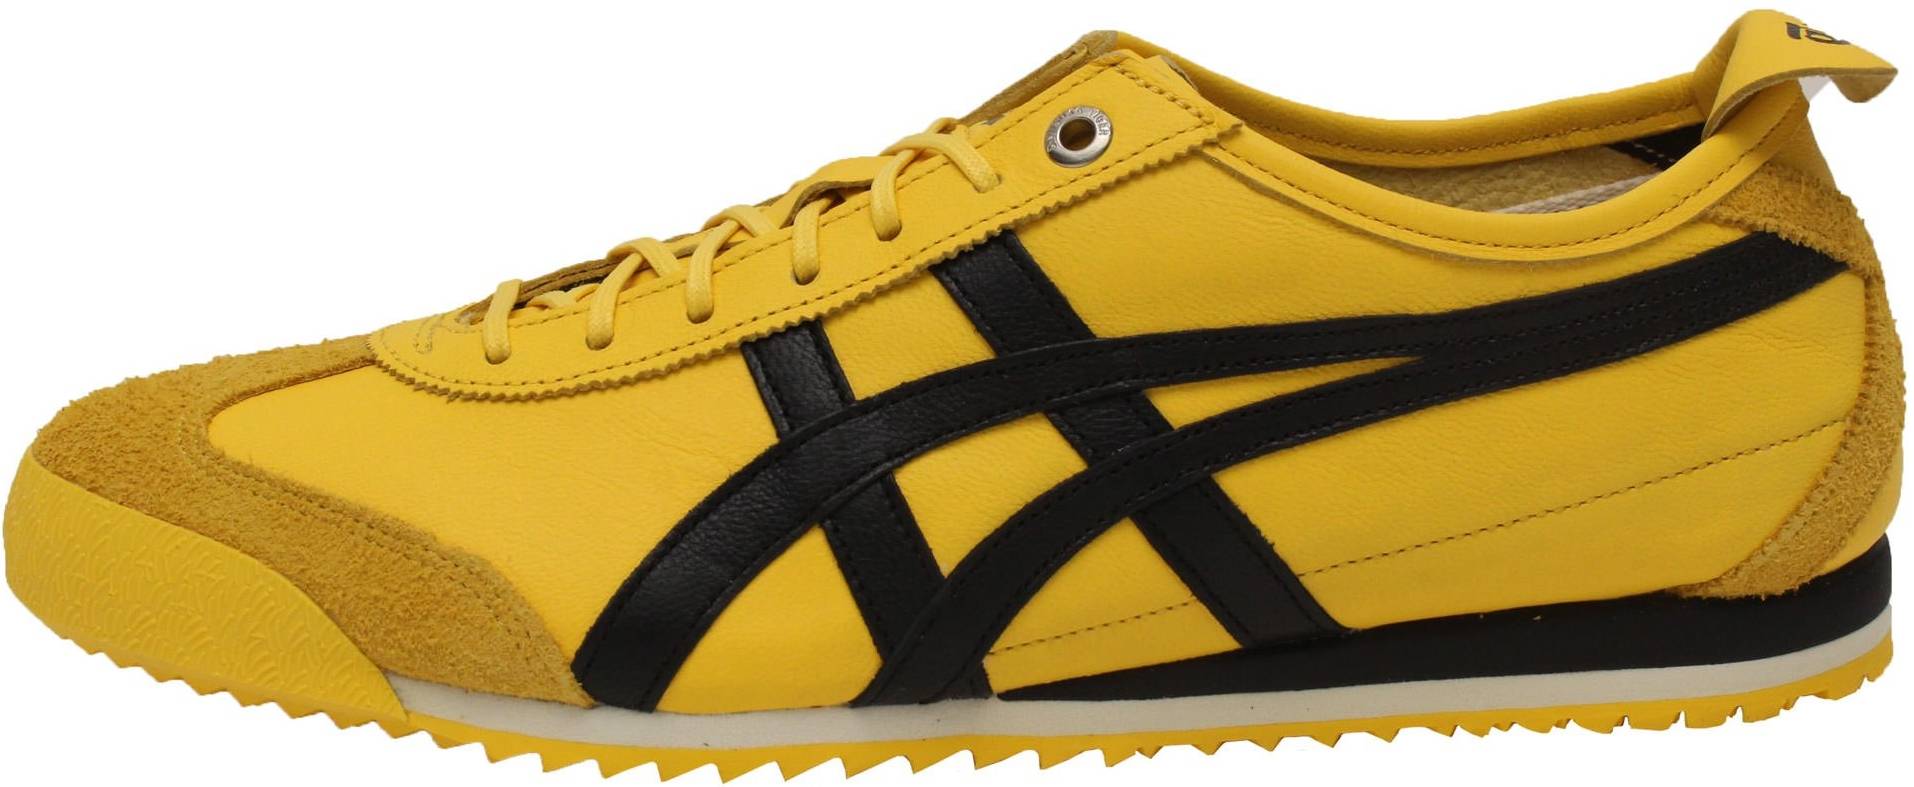 Adults Onitsuka Tiger Mexico 66 SD Super Deluxe Unisex Trainers Junior sizes 